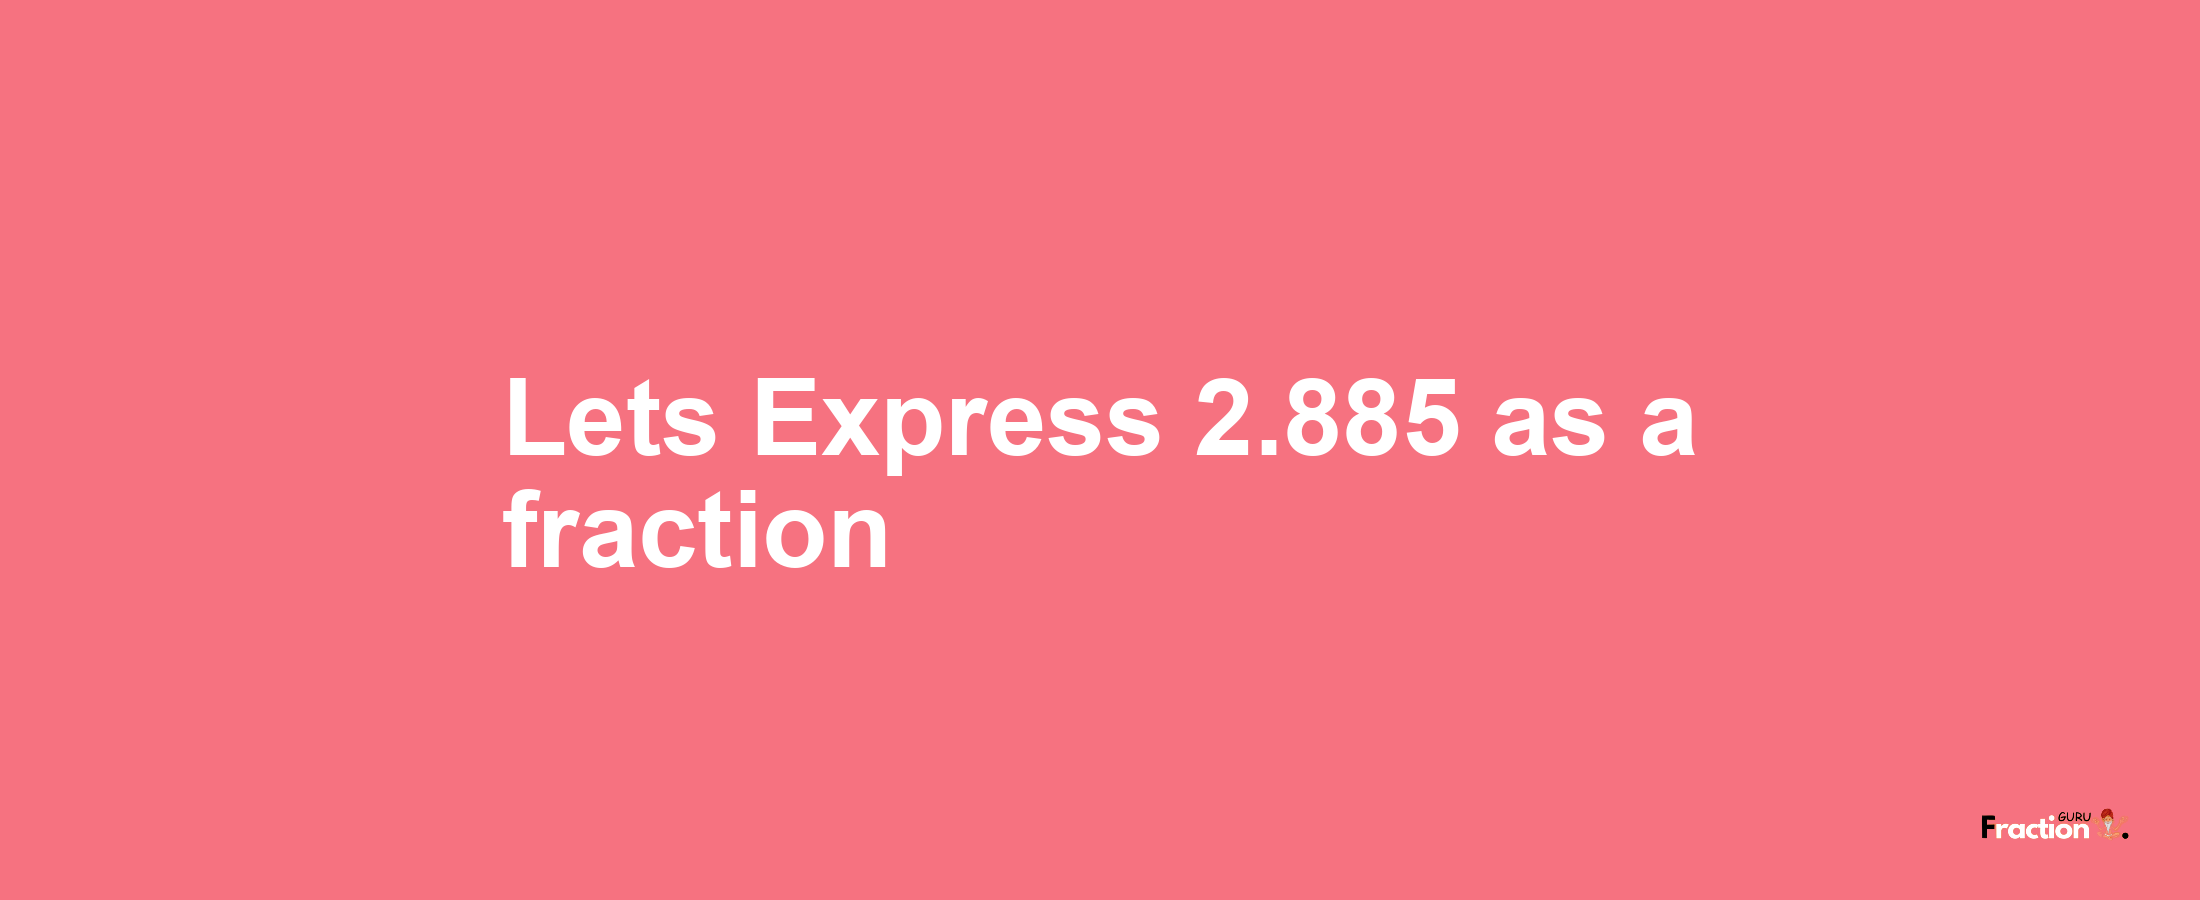 Lets Express 2.885 as afraction